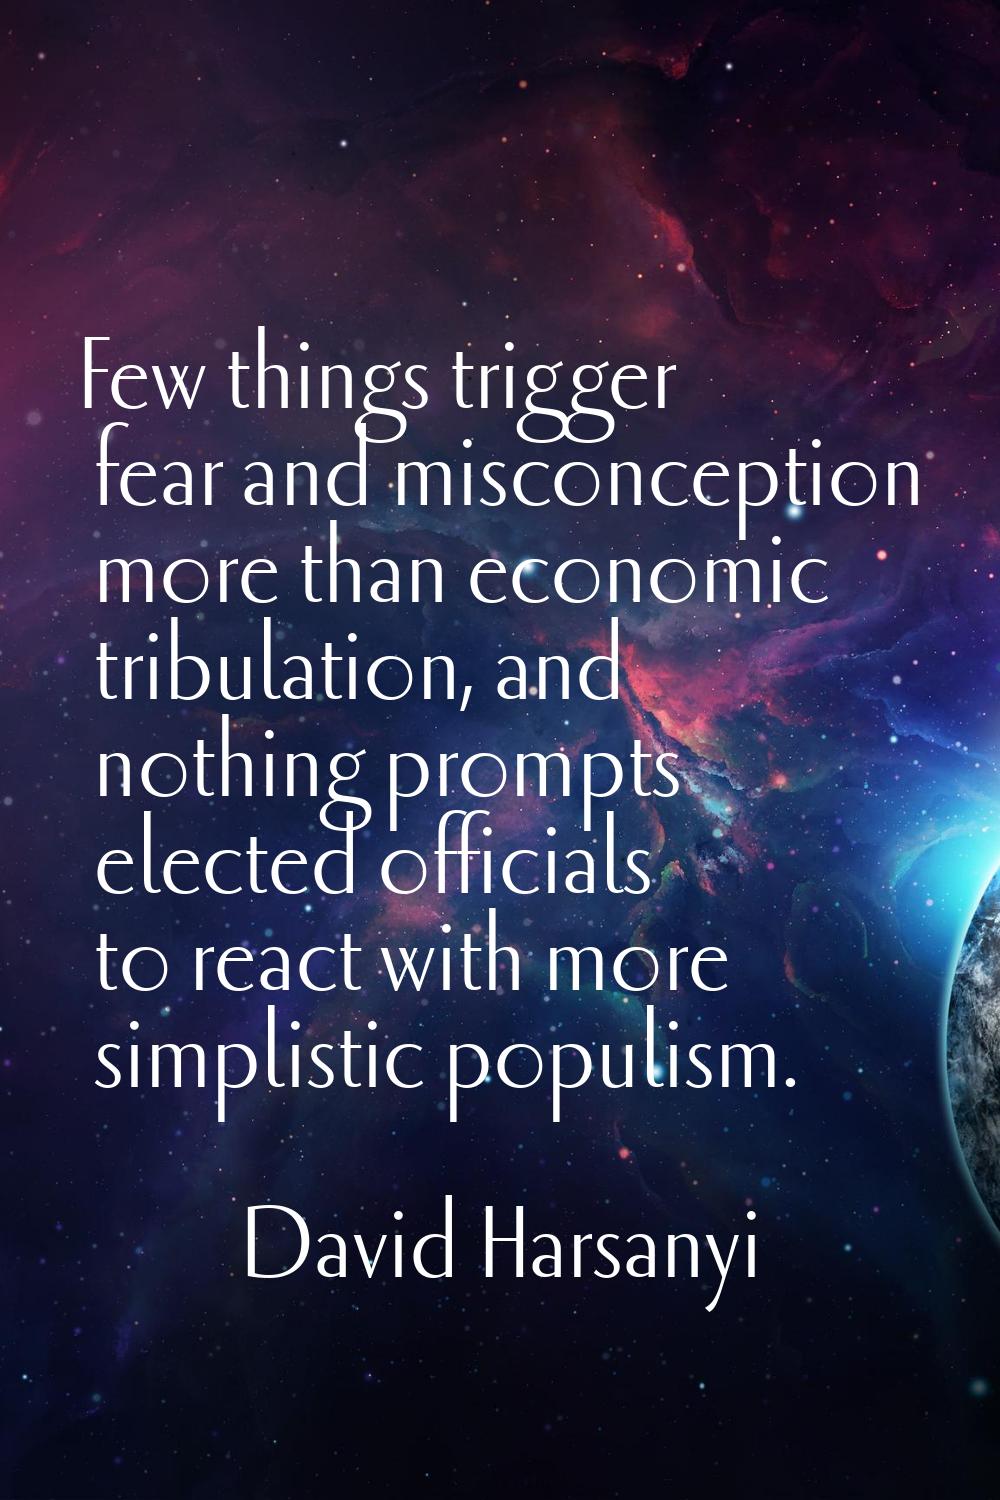 Few things trigger fear and misconception more than economic tribulation, and nothing prompts elect